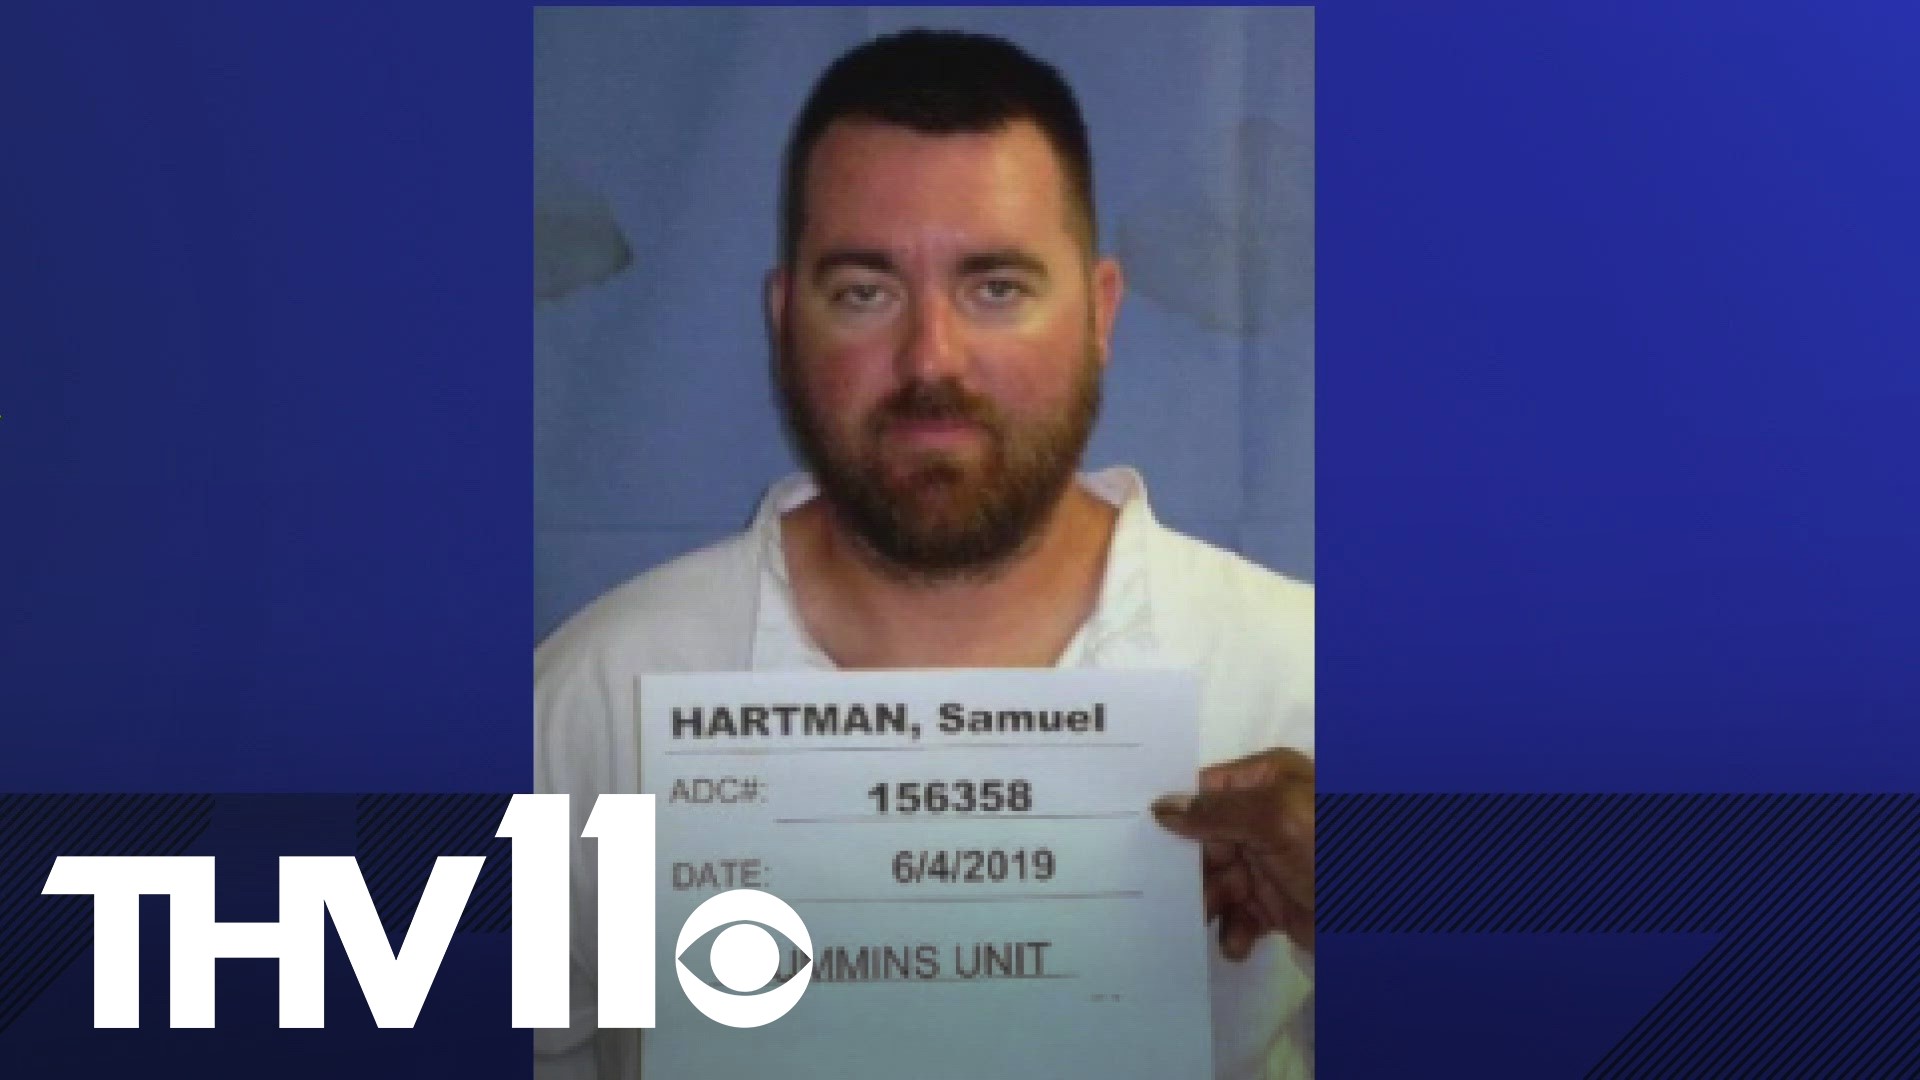 Samuel Hartman, who escaped from an Arkansas jail in August of 2022, was arrested in another state on Tuesday. Authorities said three others were also arrested.